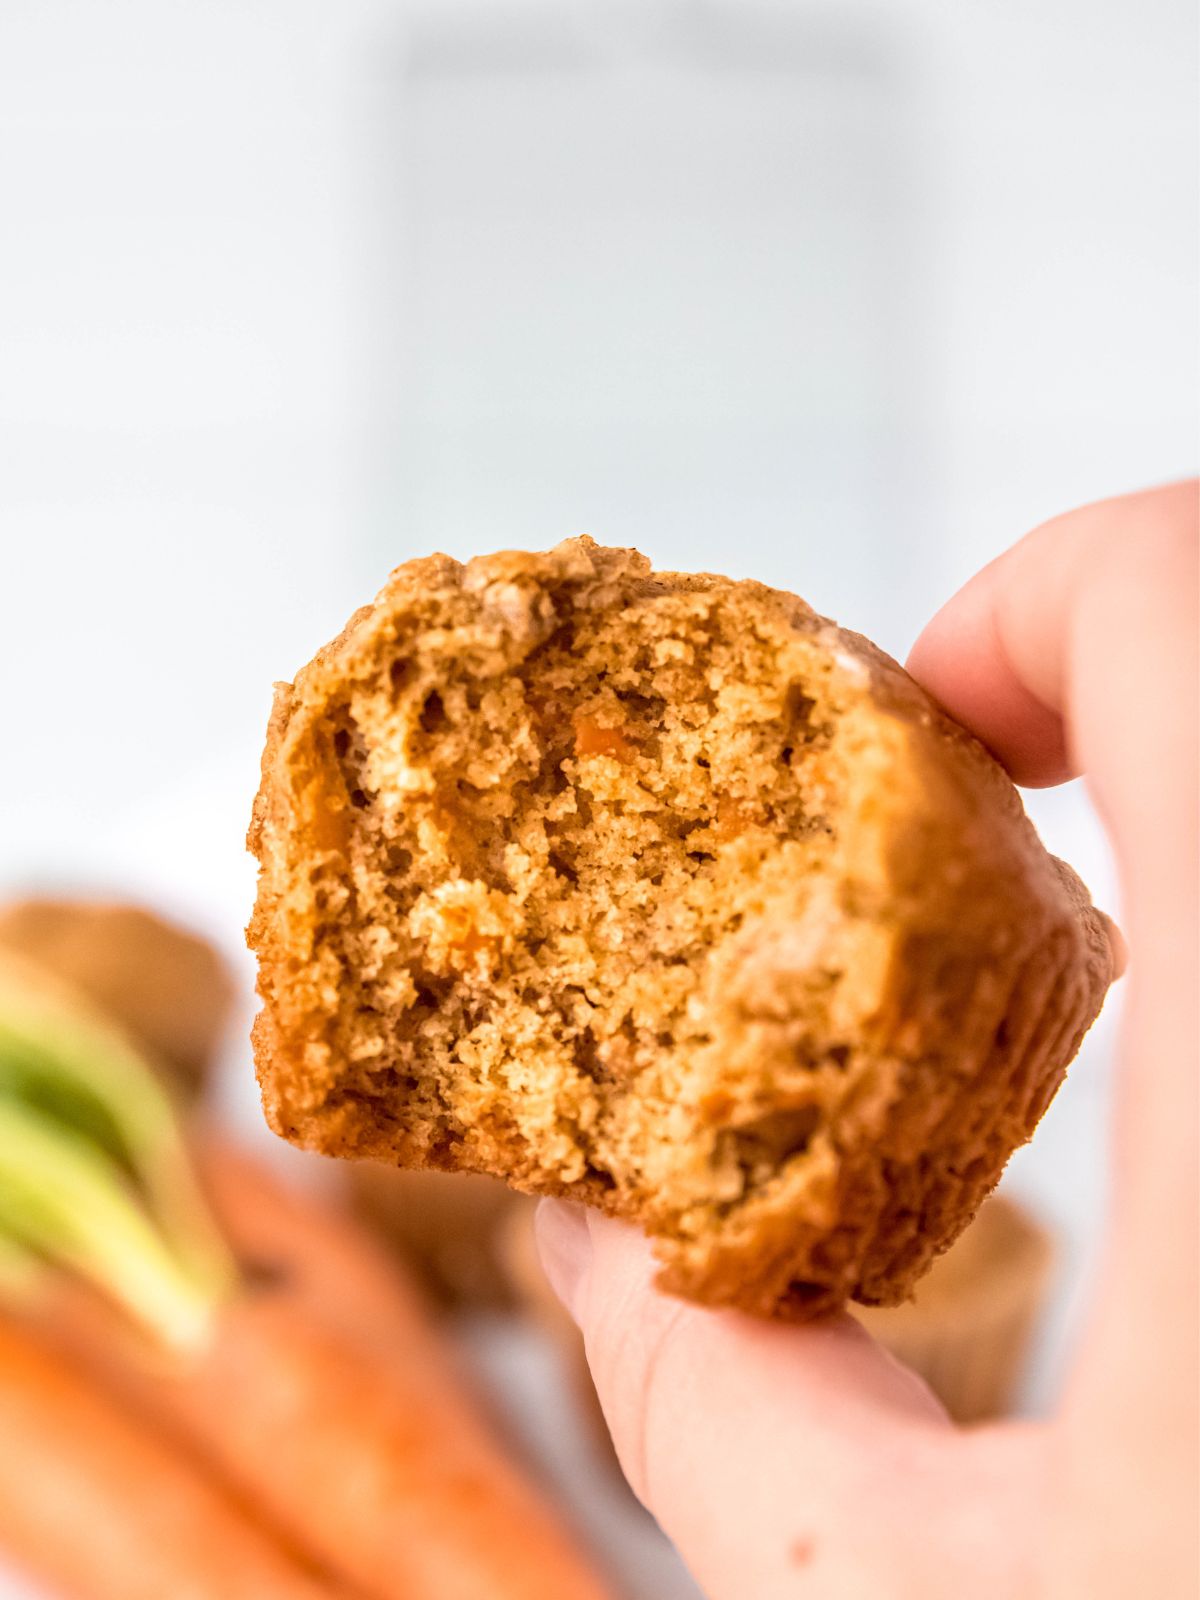 side on shot of a banana carrot muffin with a bite taken out to show the tender crumbed interior.